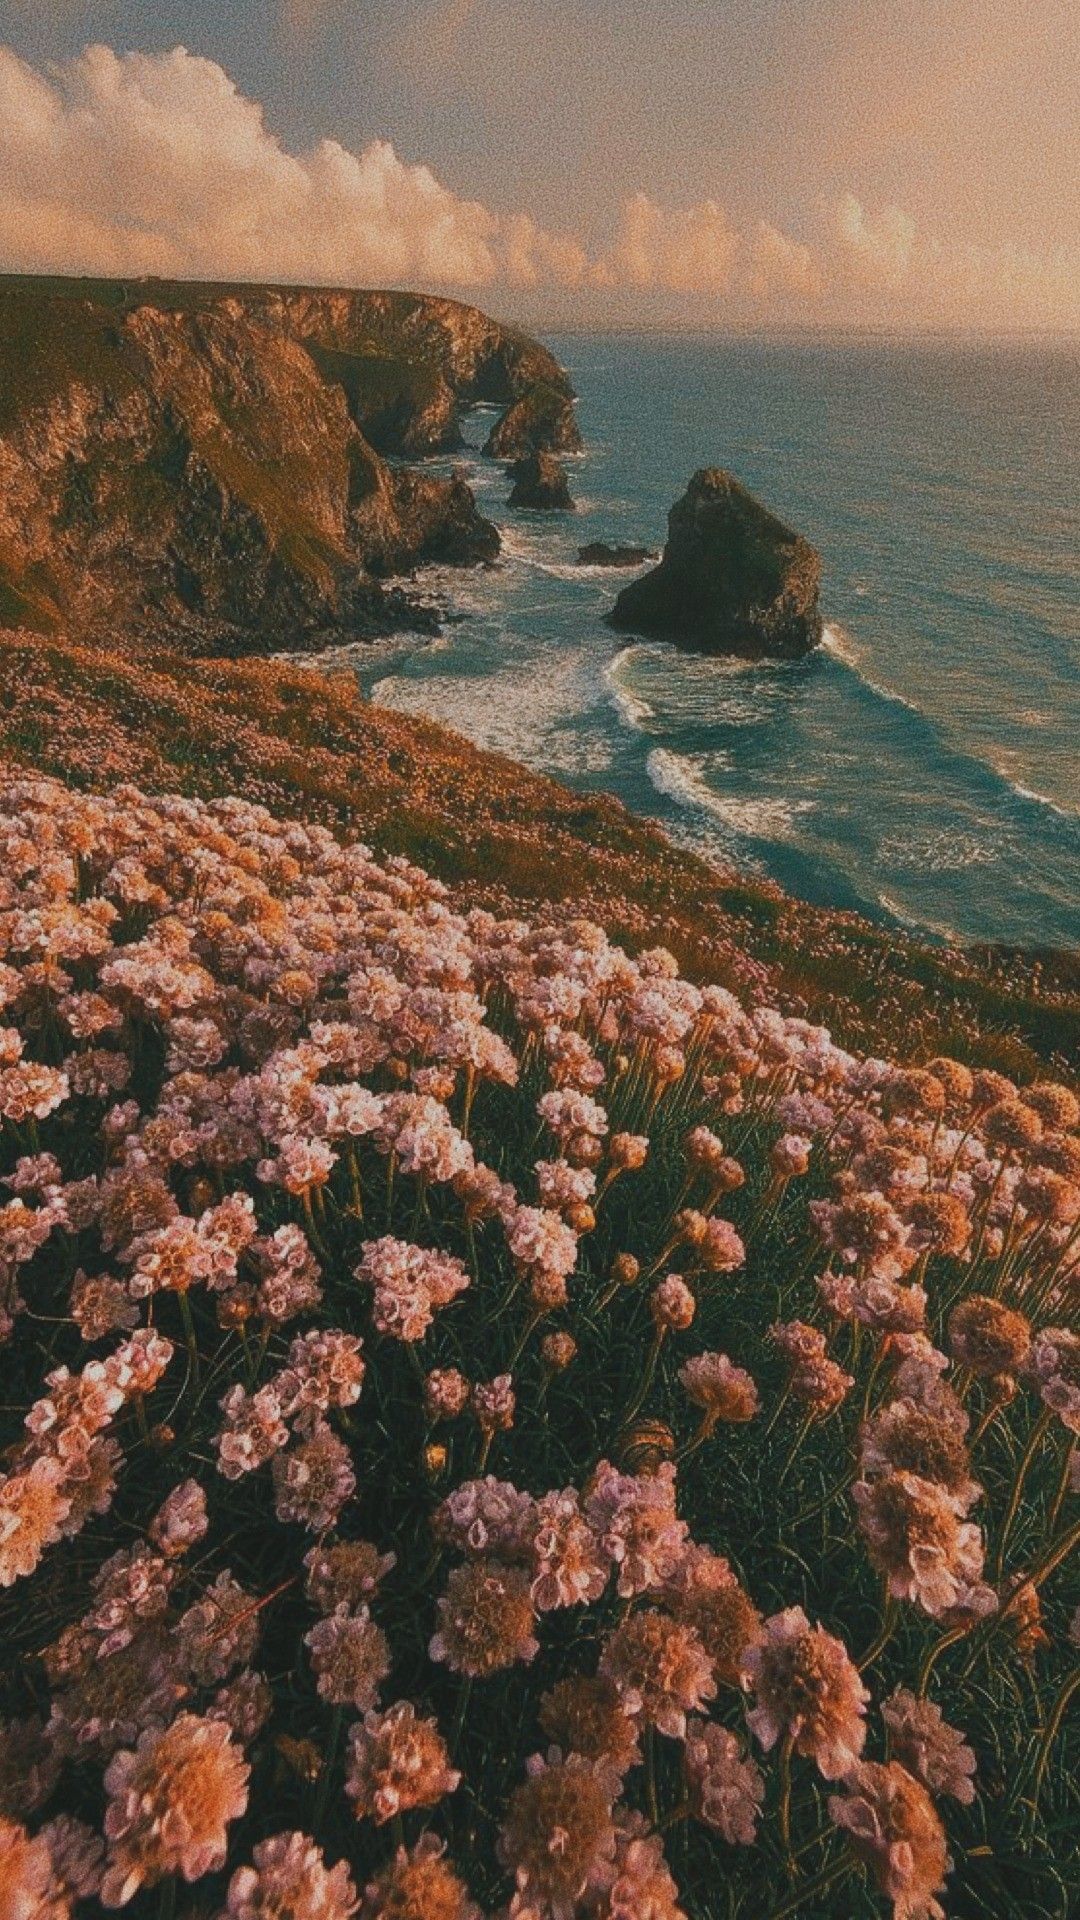 A field of flowers next to the ocean - Nature, coast